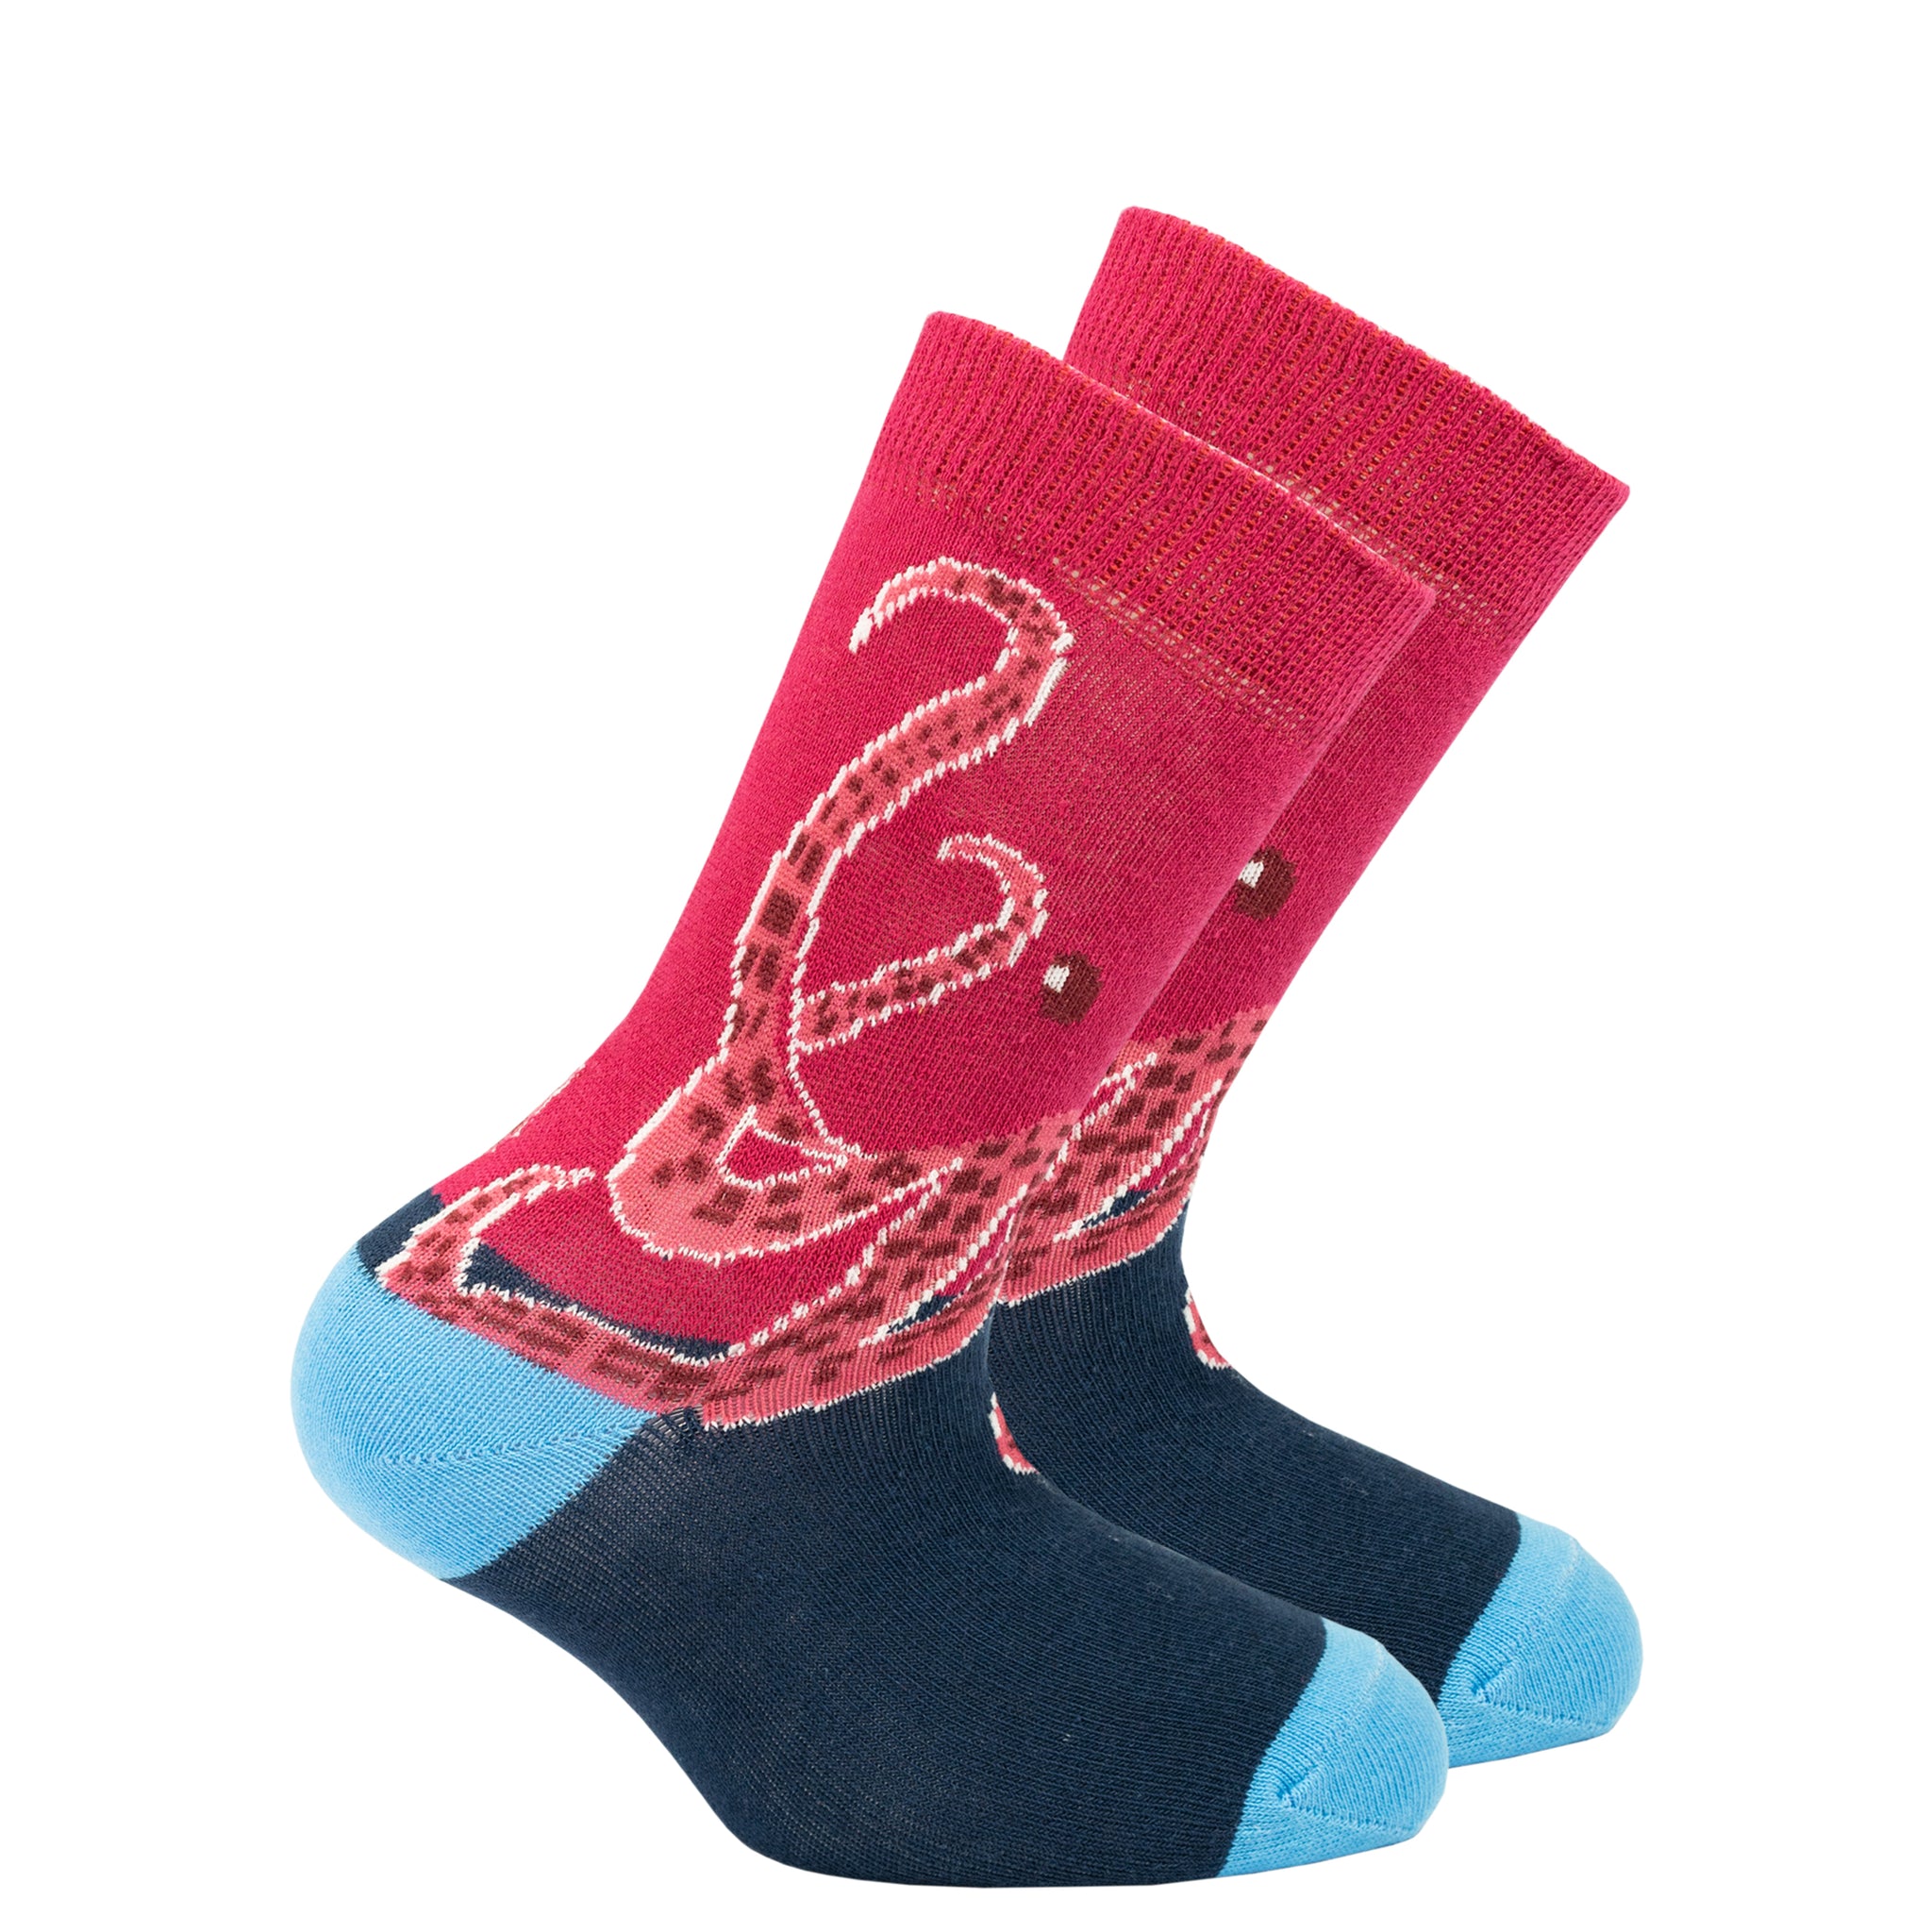 Kids Octopus Socks red and blue